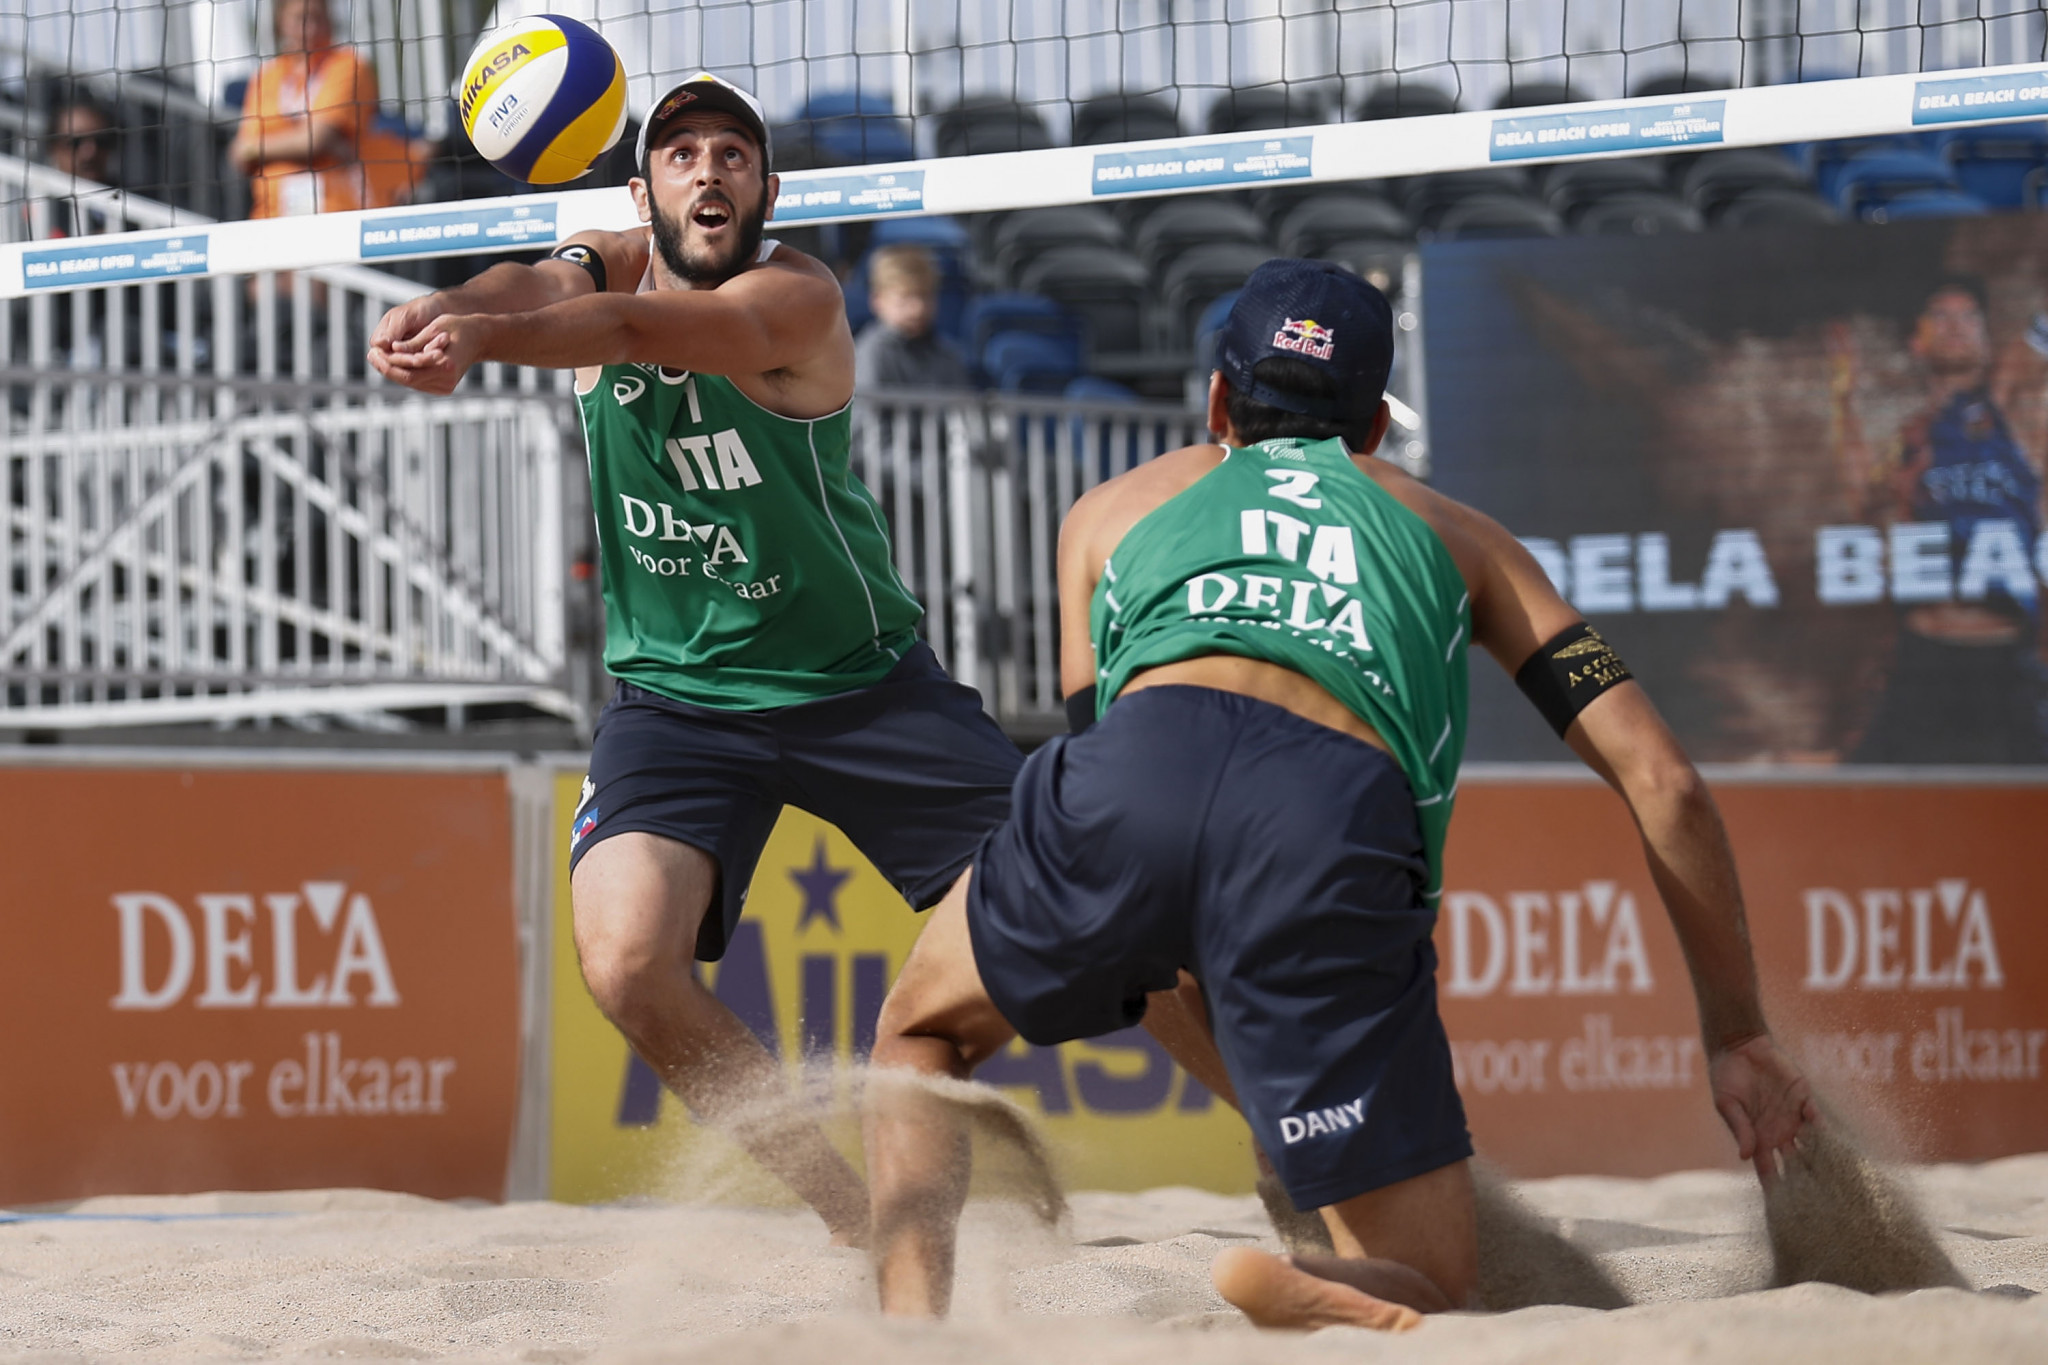 Paolo Nicolai and Daniele Lupo are setting their sights on a strong run at the Beach Volleyball World Tour four-star event in Sochi after beating Pablo Herrera and Adrian Gavira ©Getty Images